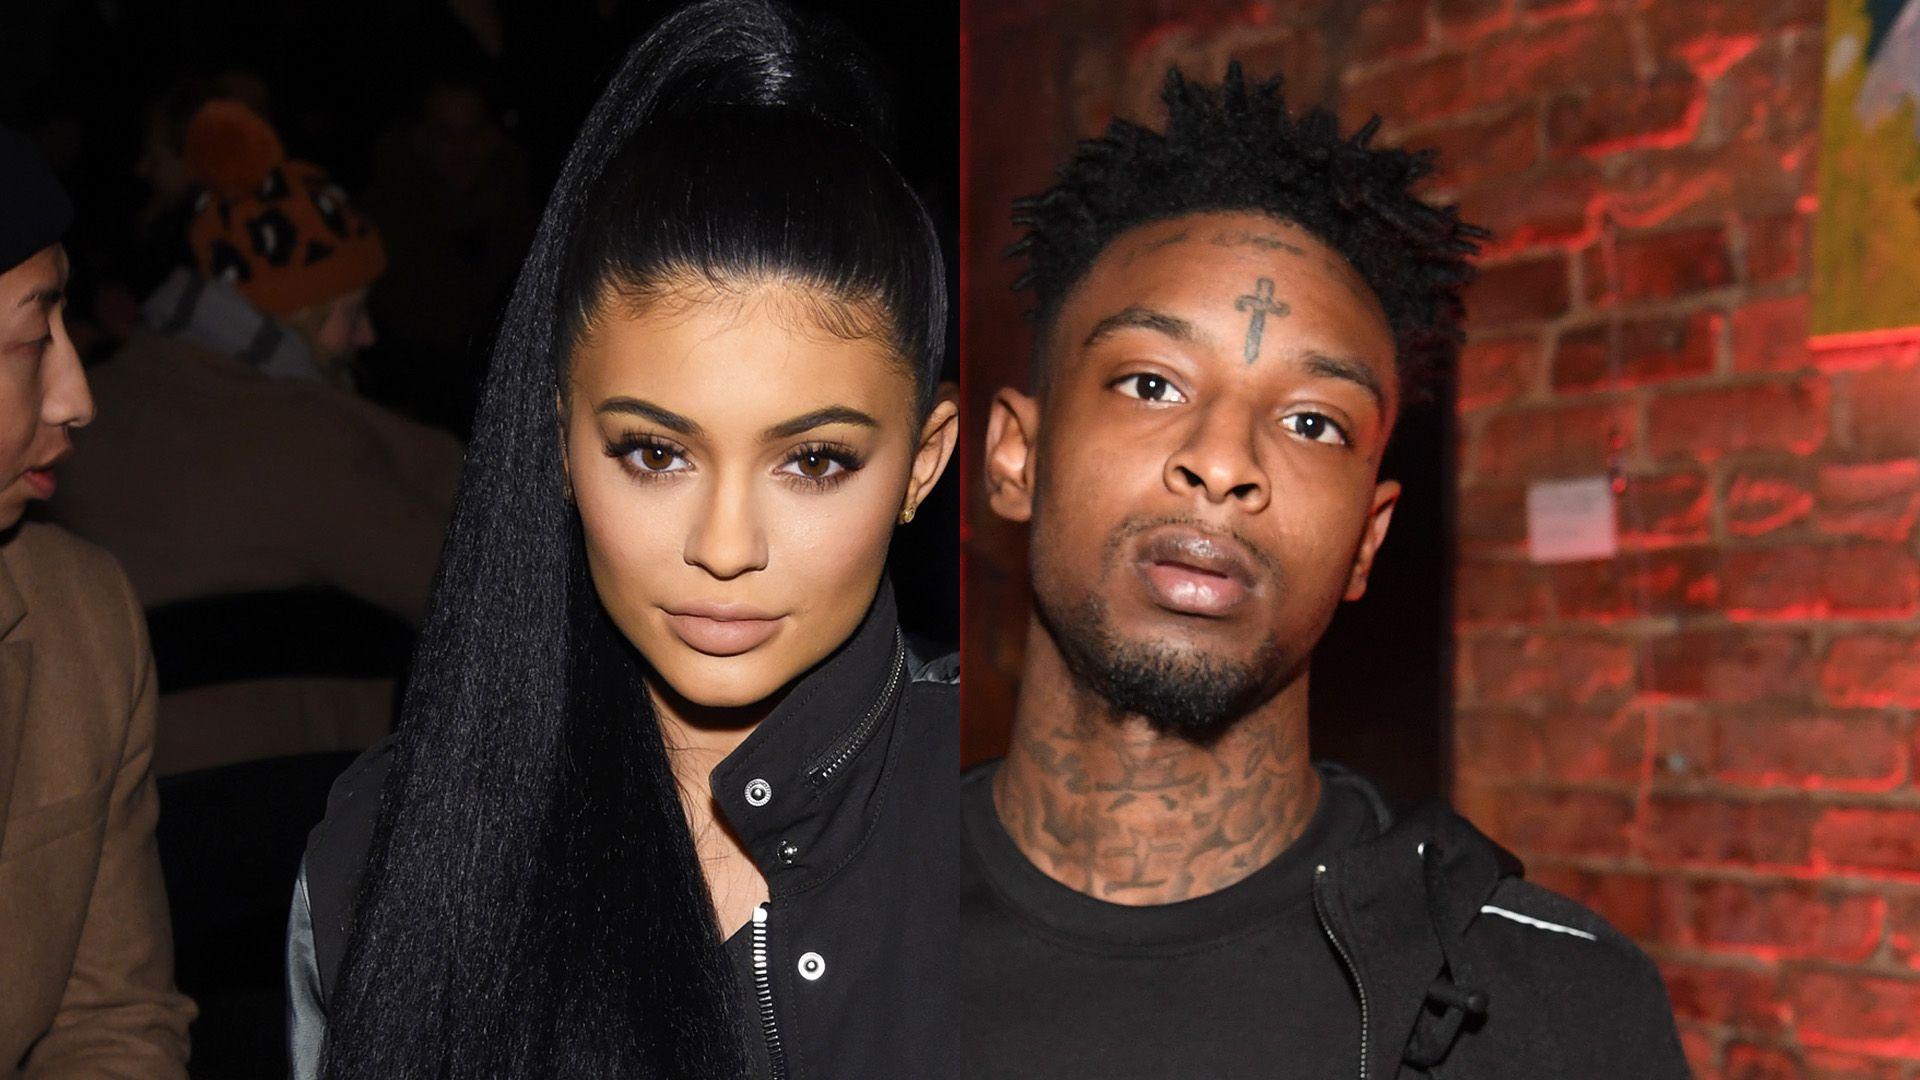 BET Breaks: 21 Savage&;s Beef With Tyga Escalates. Video